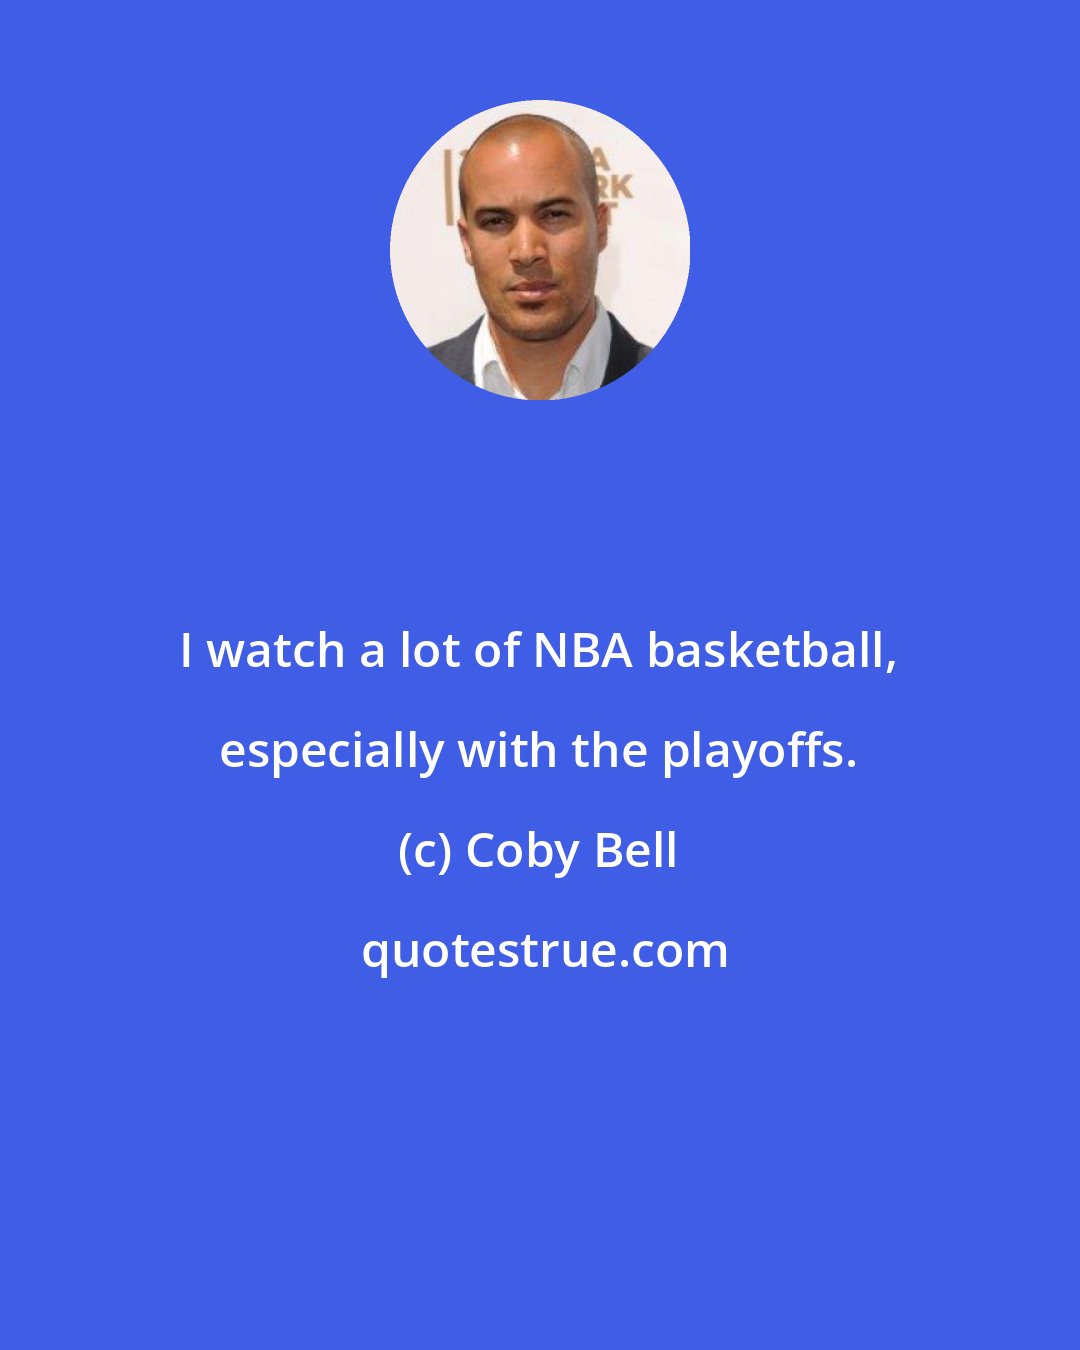 Coby Bell: I watch a lot of NBA basketball, especially with the playoffs.